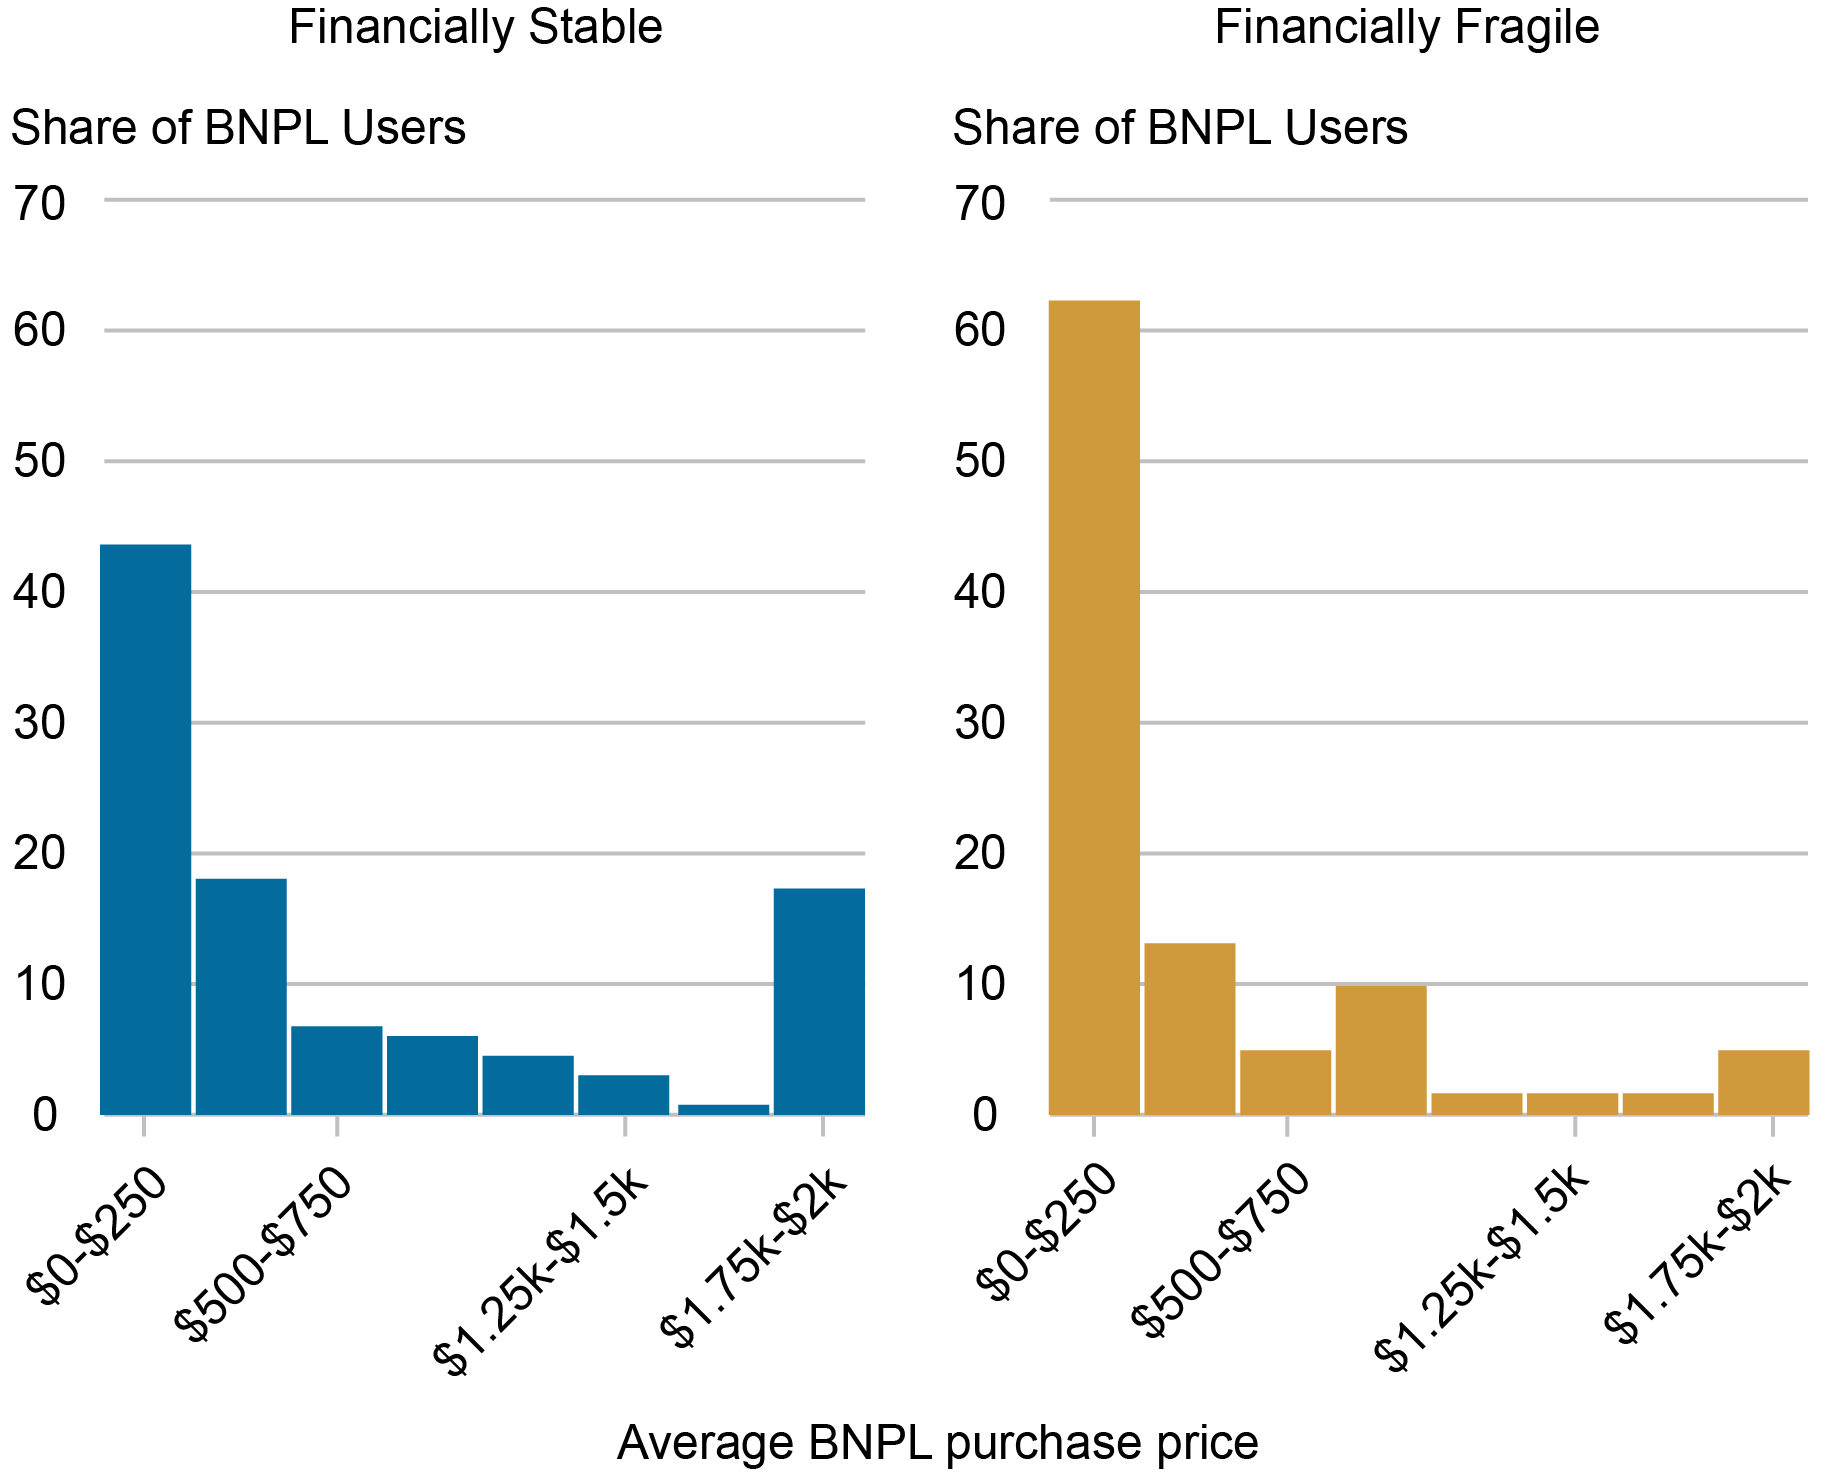 The authors shed further light on the place of “buy now, pay later” (BNPL) in its users’ household finances, with a particular focus on how use varies by a household’s level of financial fragility. 